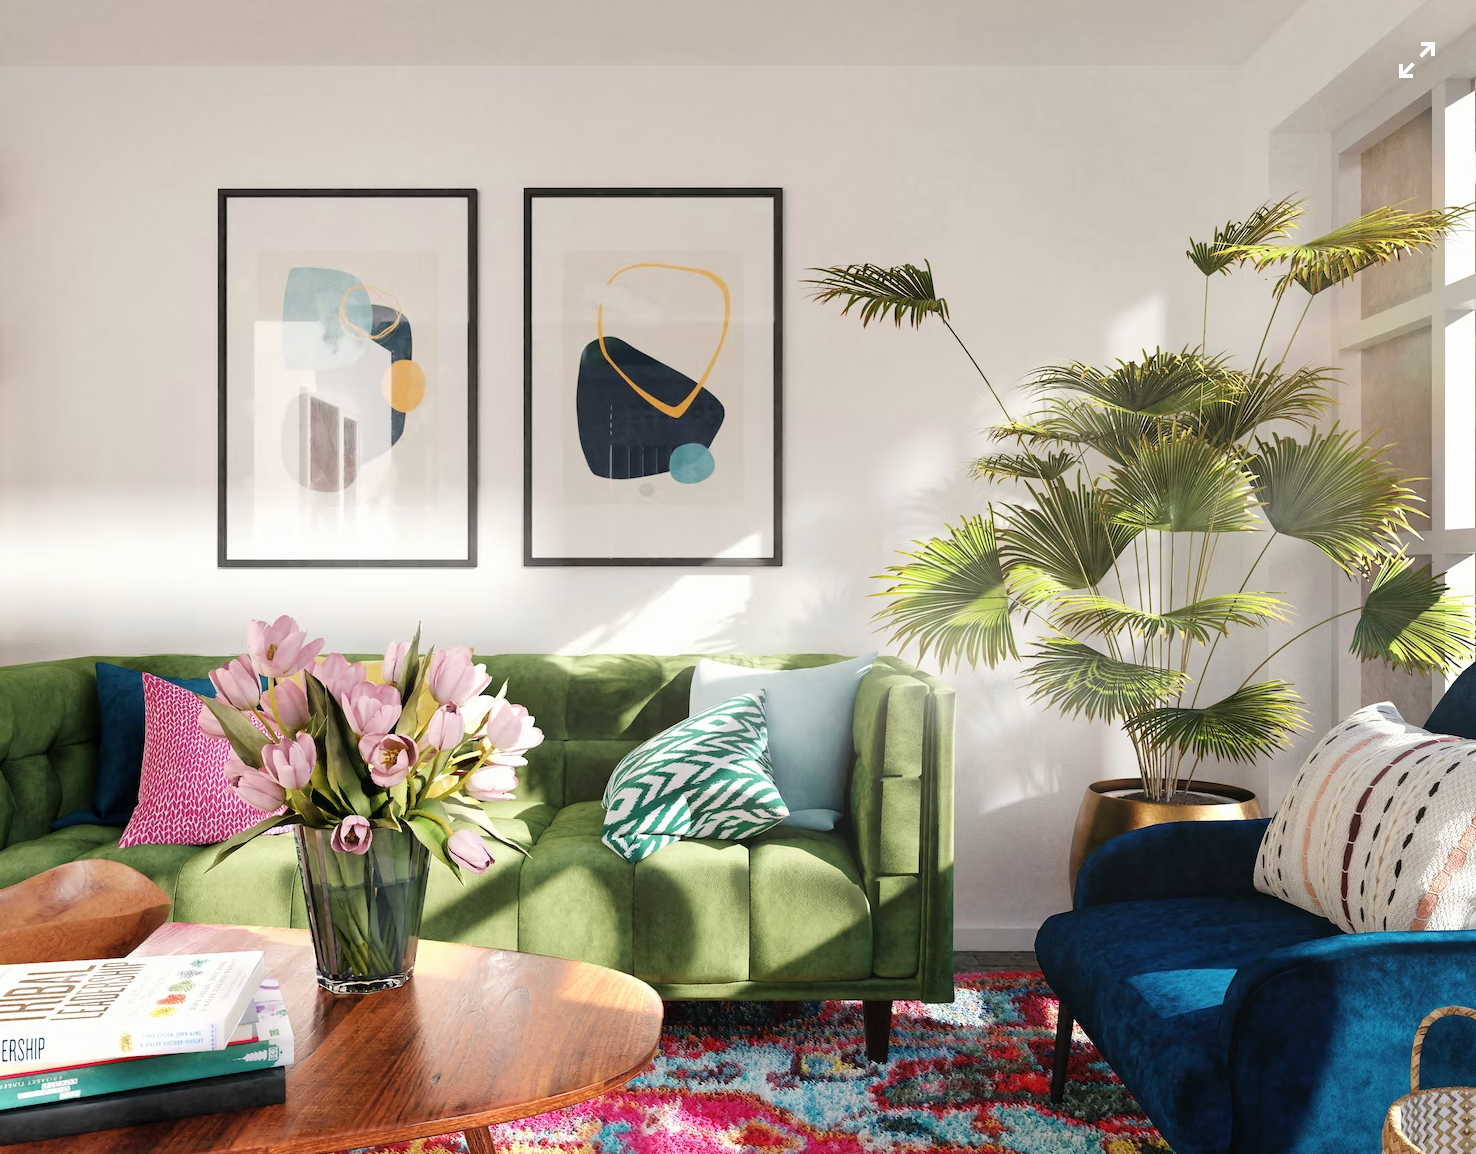 A photo of a living room with a green sofa, artwork and plant